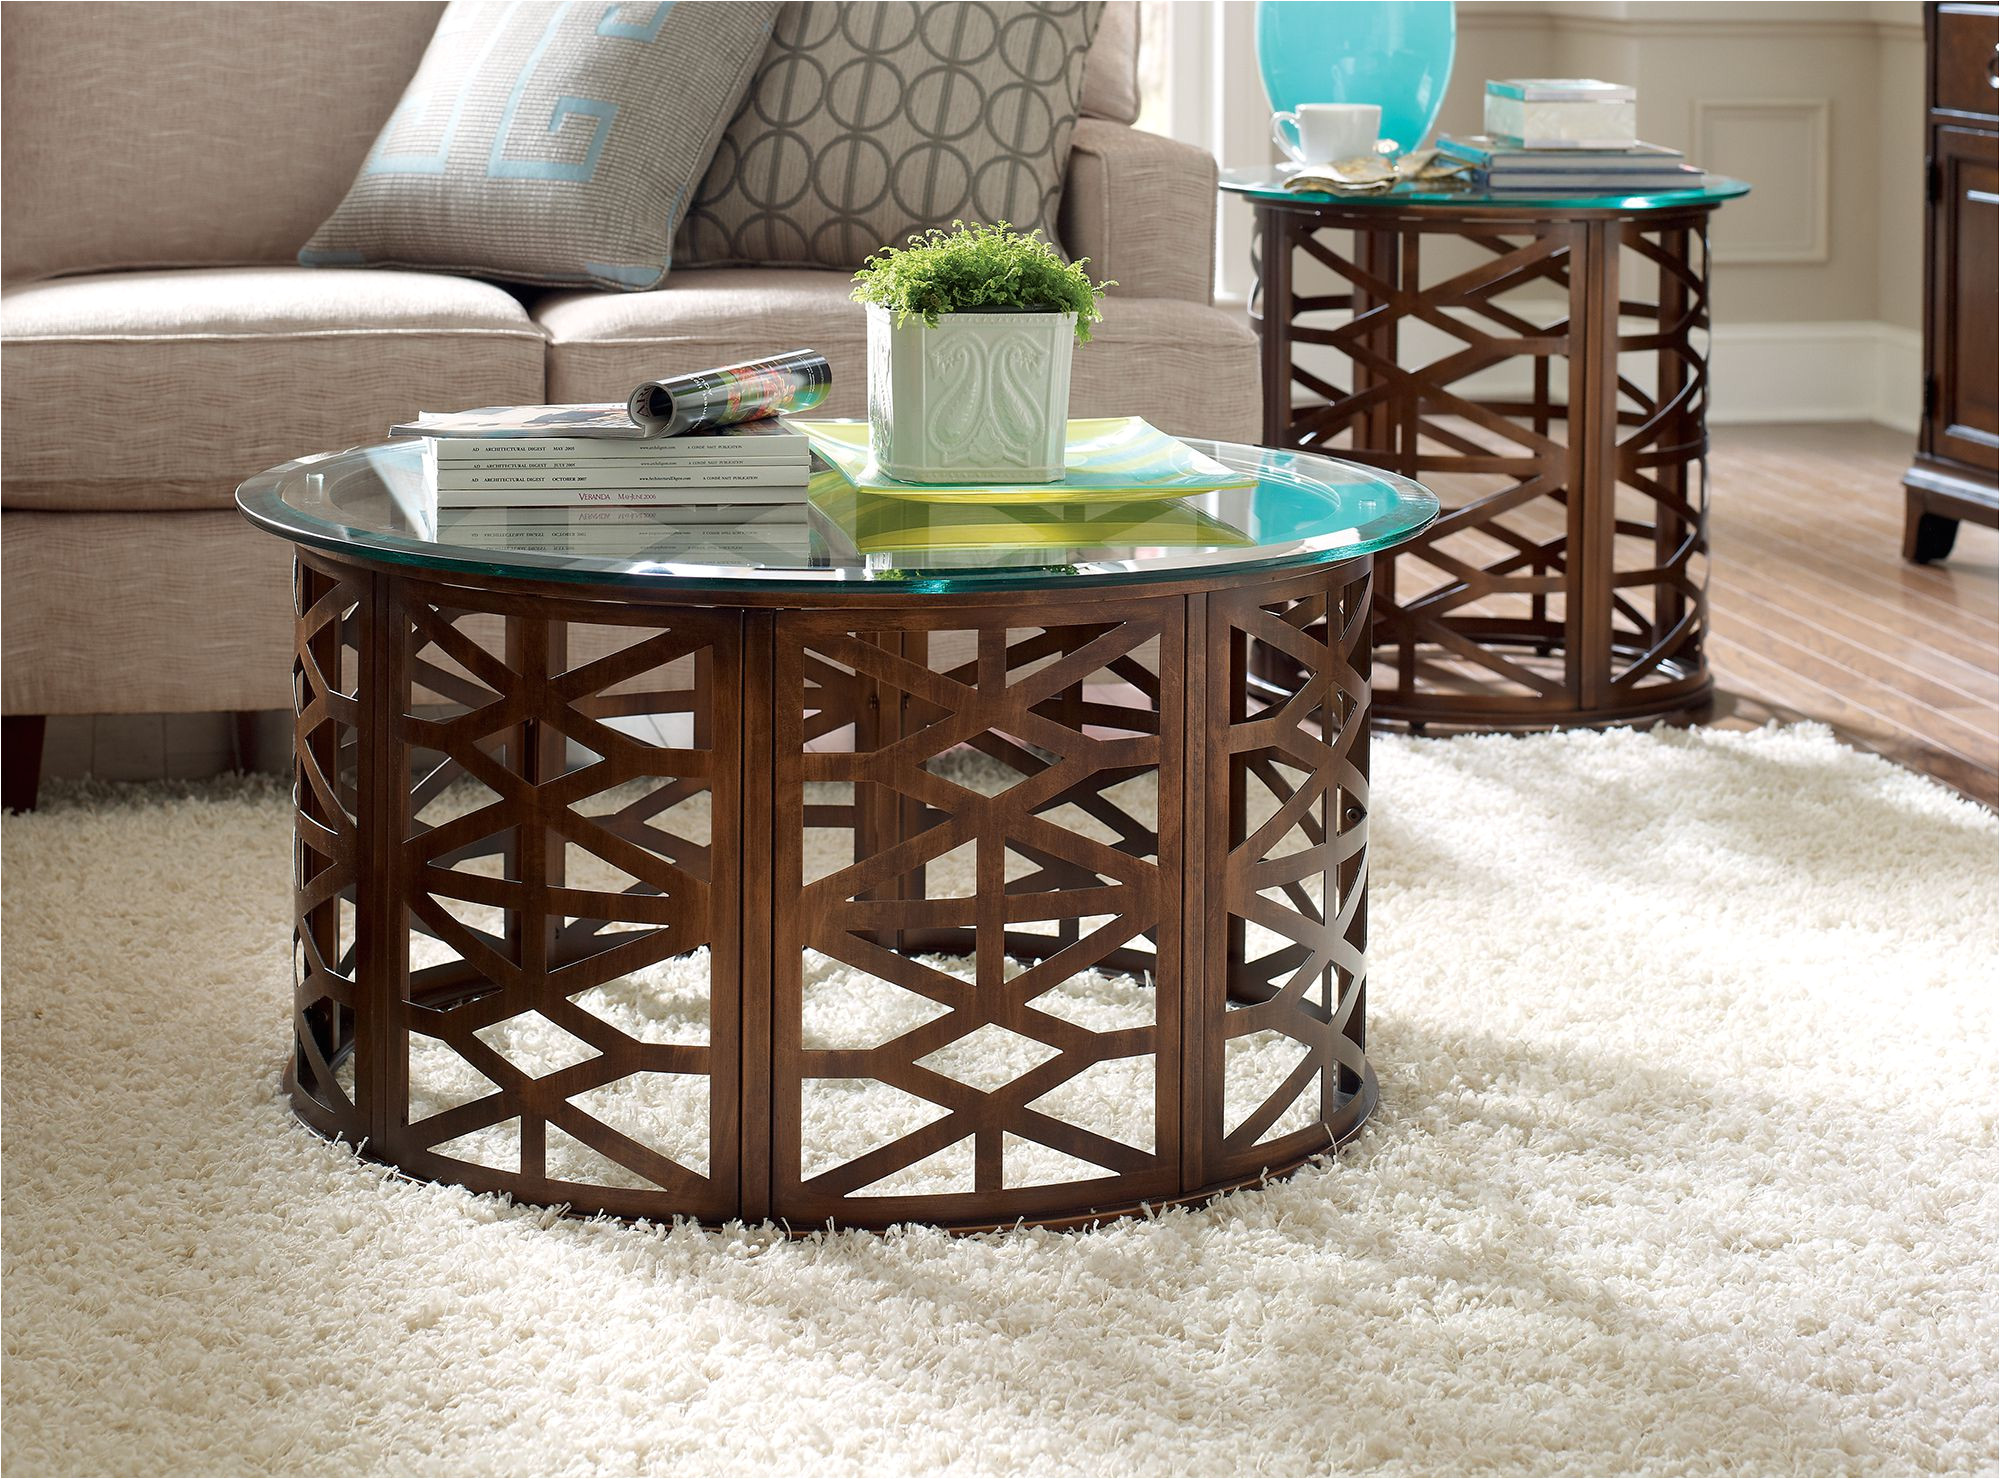 Cocktail Table Coffee Table Difference Questions to ask before You Choose A Coffee Table